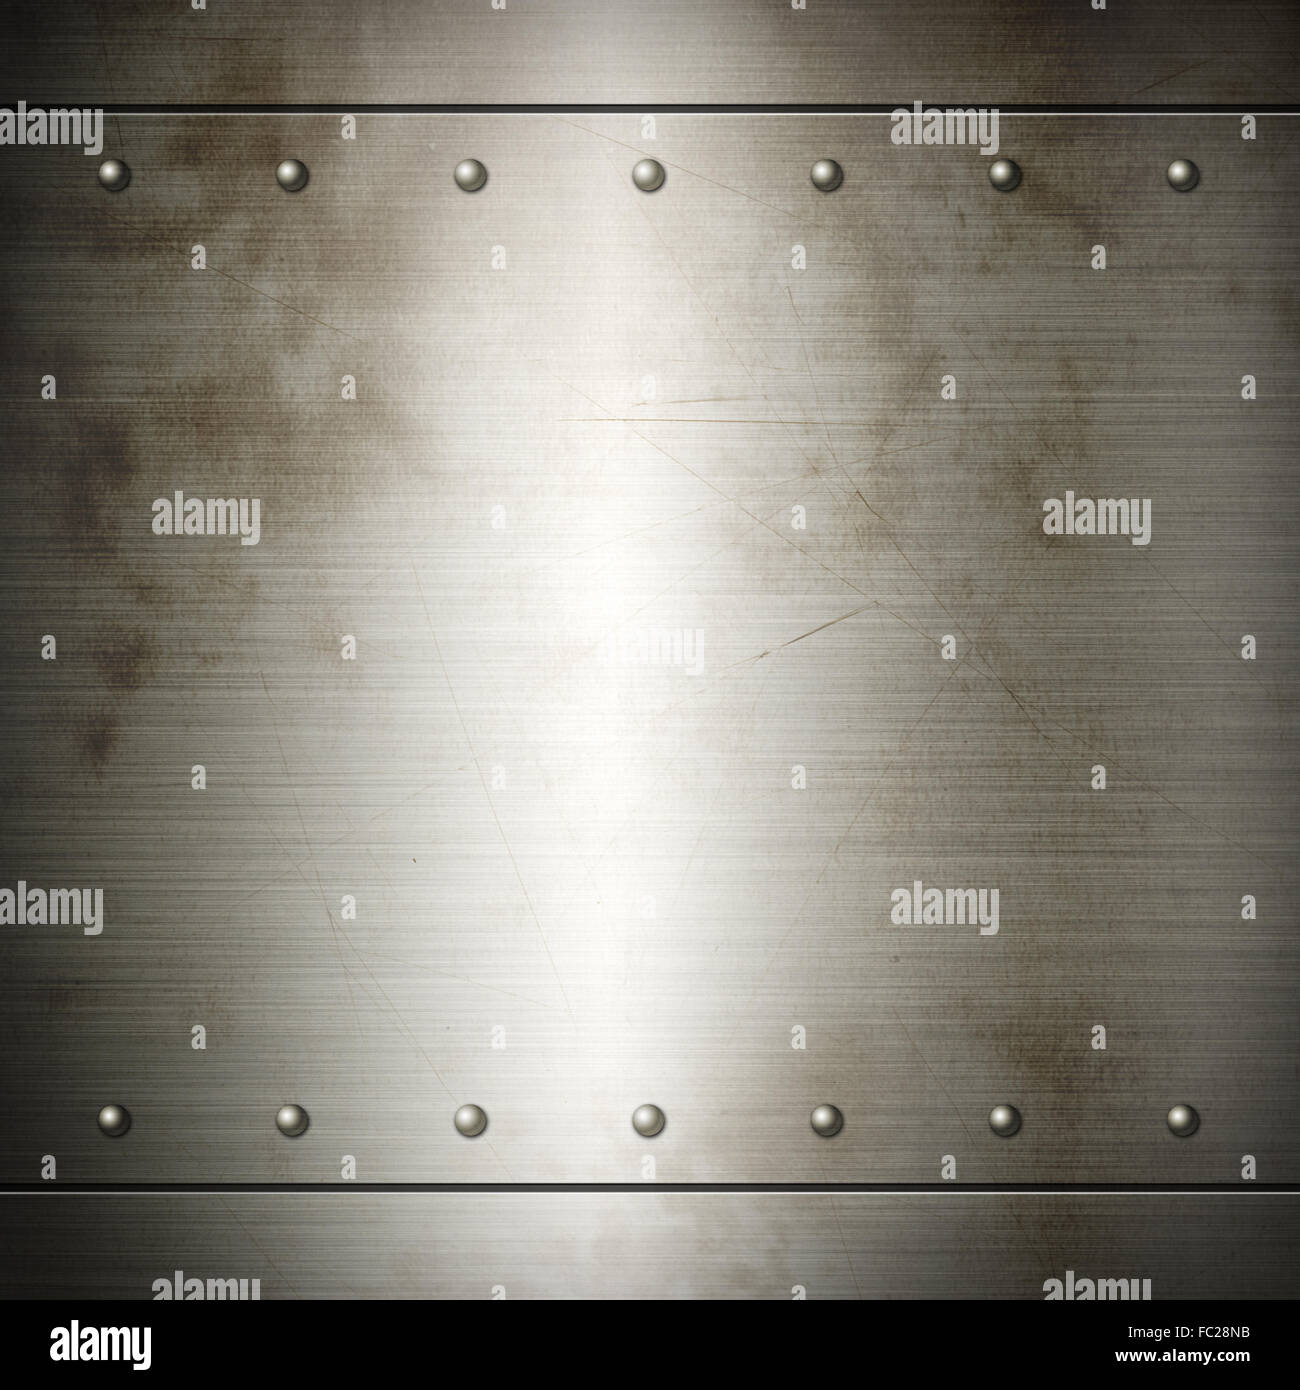 Old steel riveted brushed plate texture Stock Photo